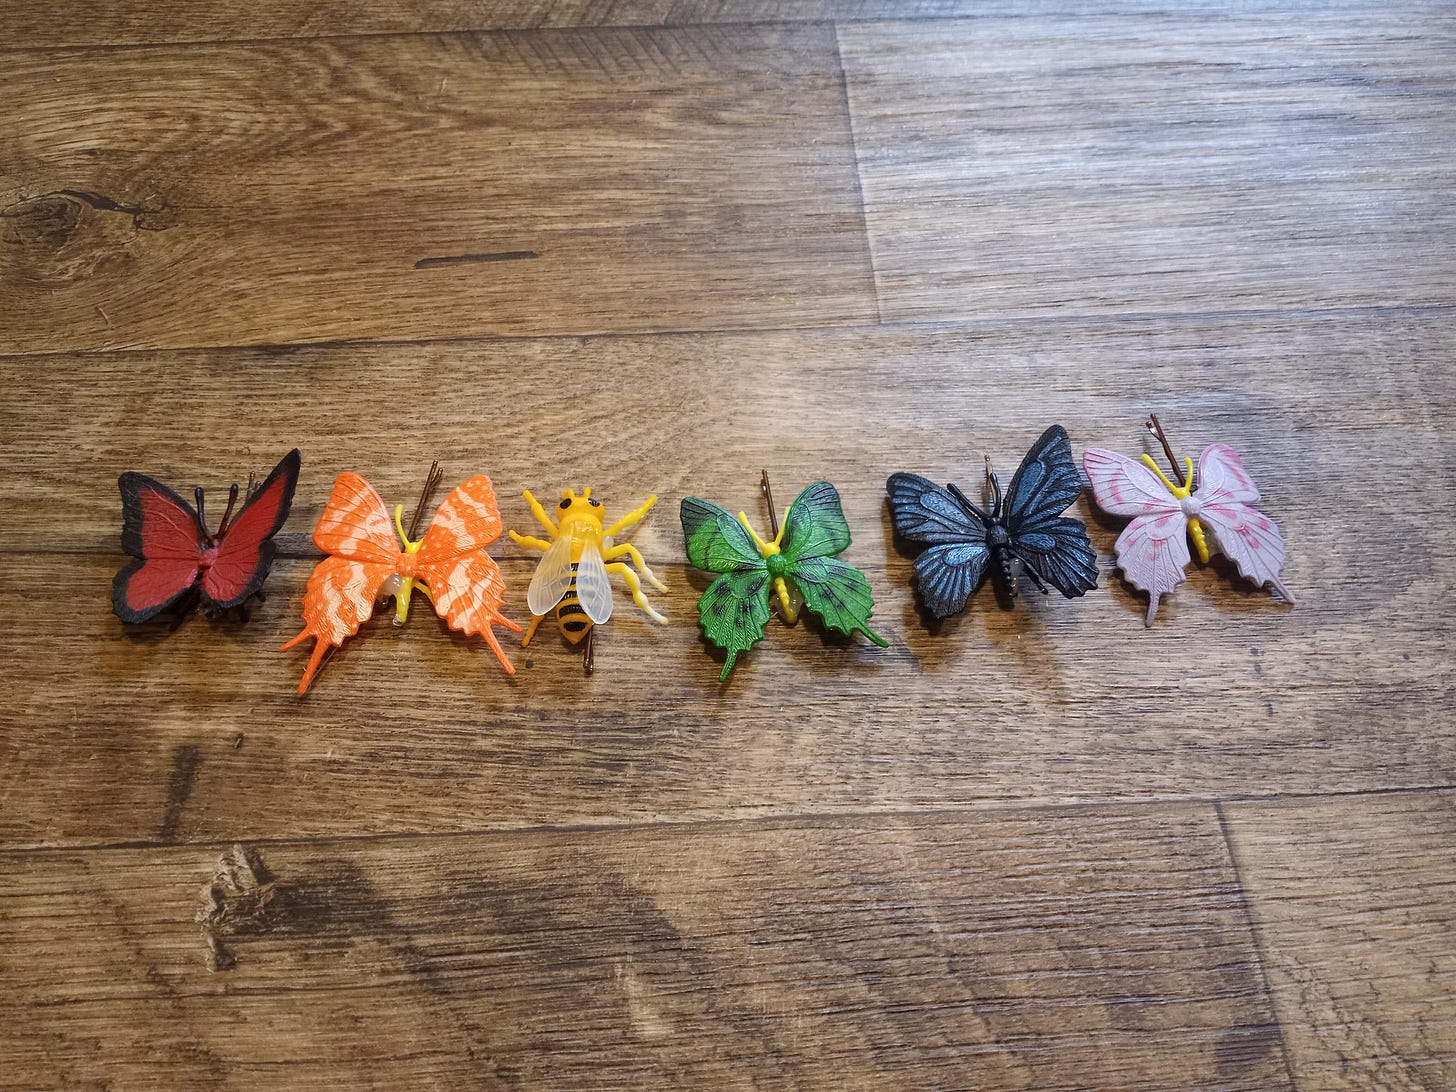 A rainbow of plastic butterfly hair clips lined up, with yellow being a bumble bee